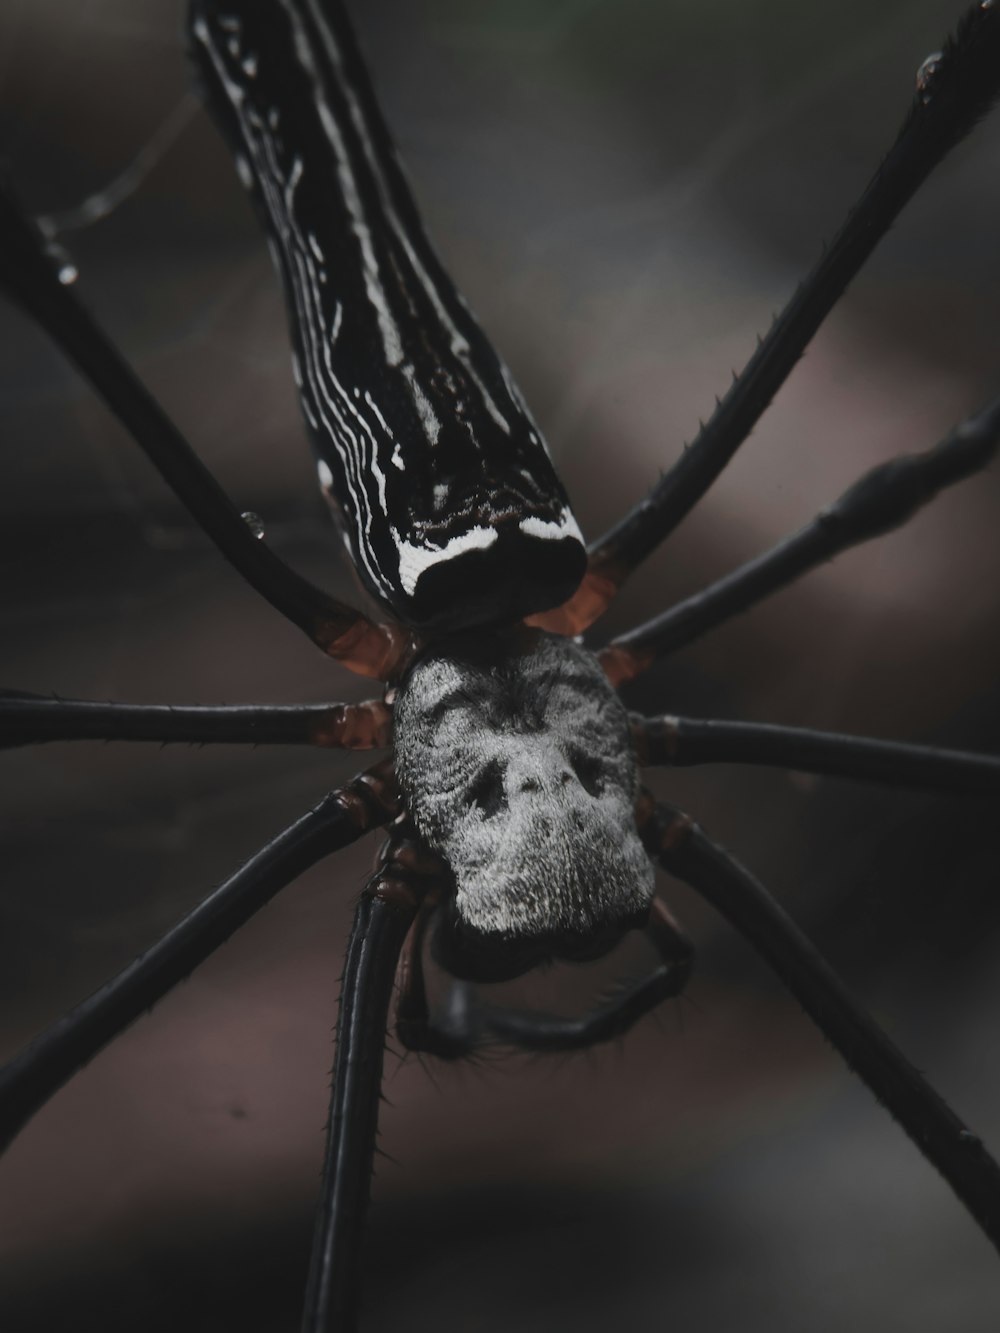 black and white spider on web in close up photography during daytime